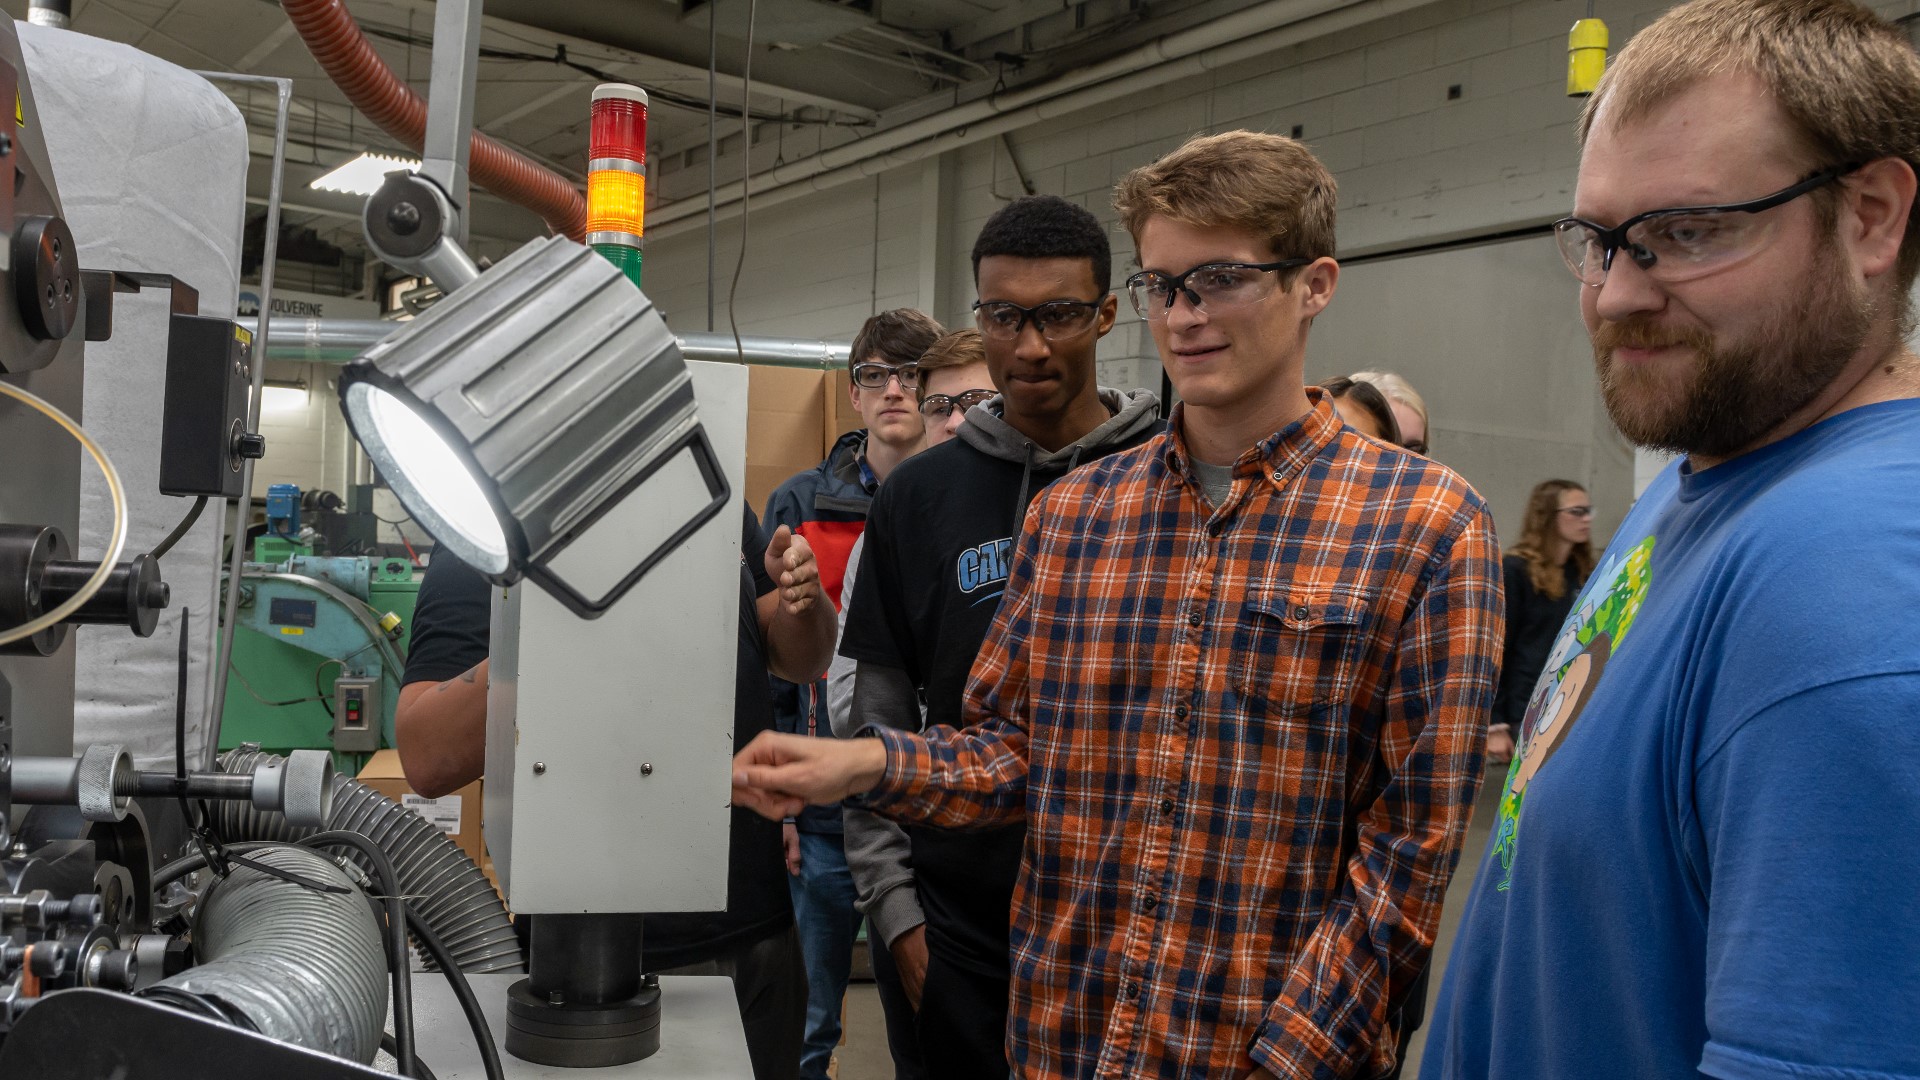 More than 180 manufacturers throughout West Michigan hosted student open houses and tours to showcase their facilities and career options to more than 8,000 students